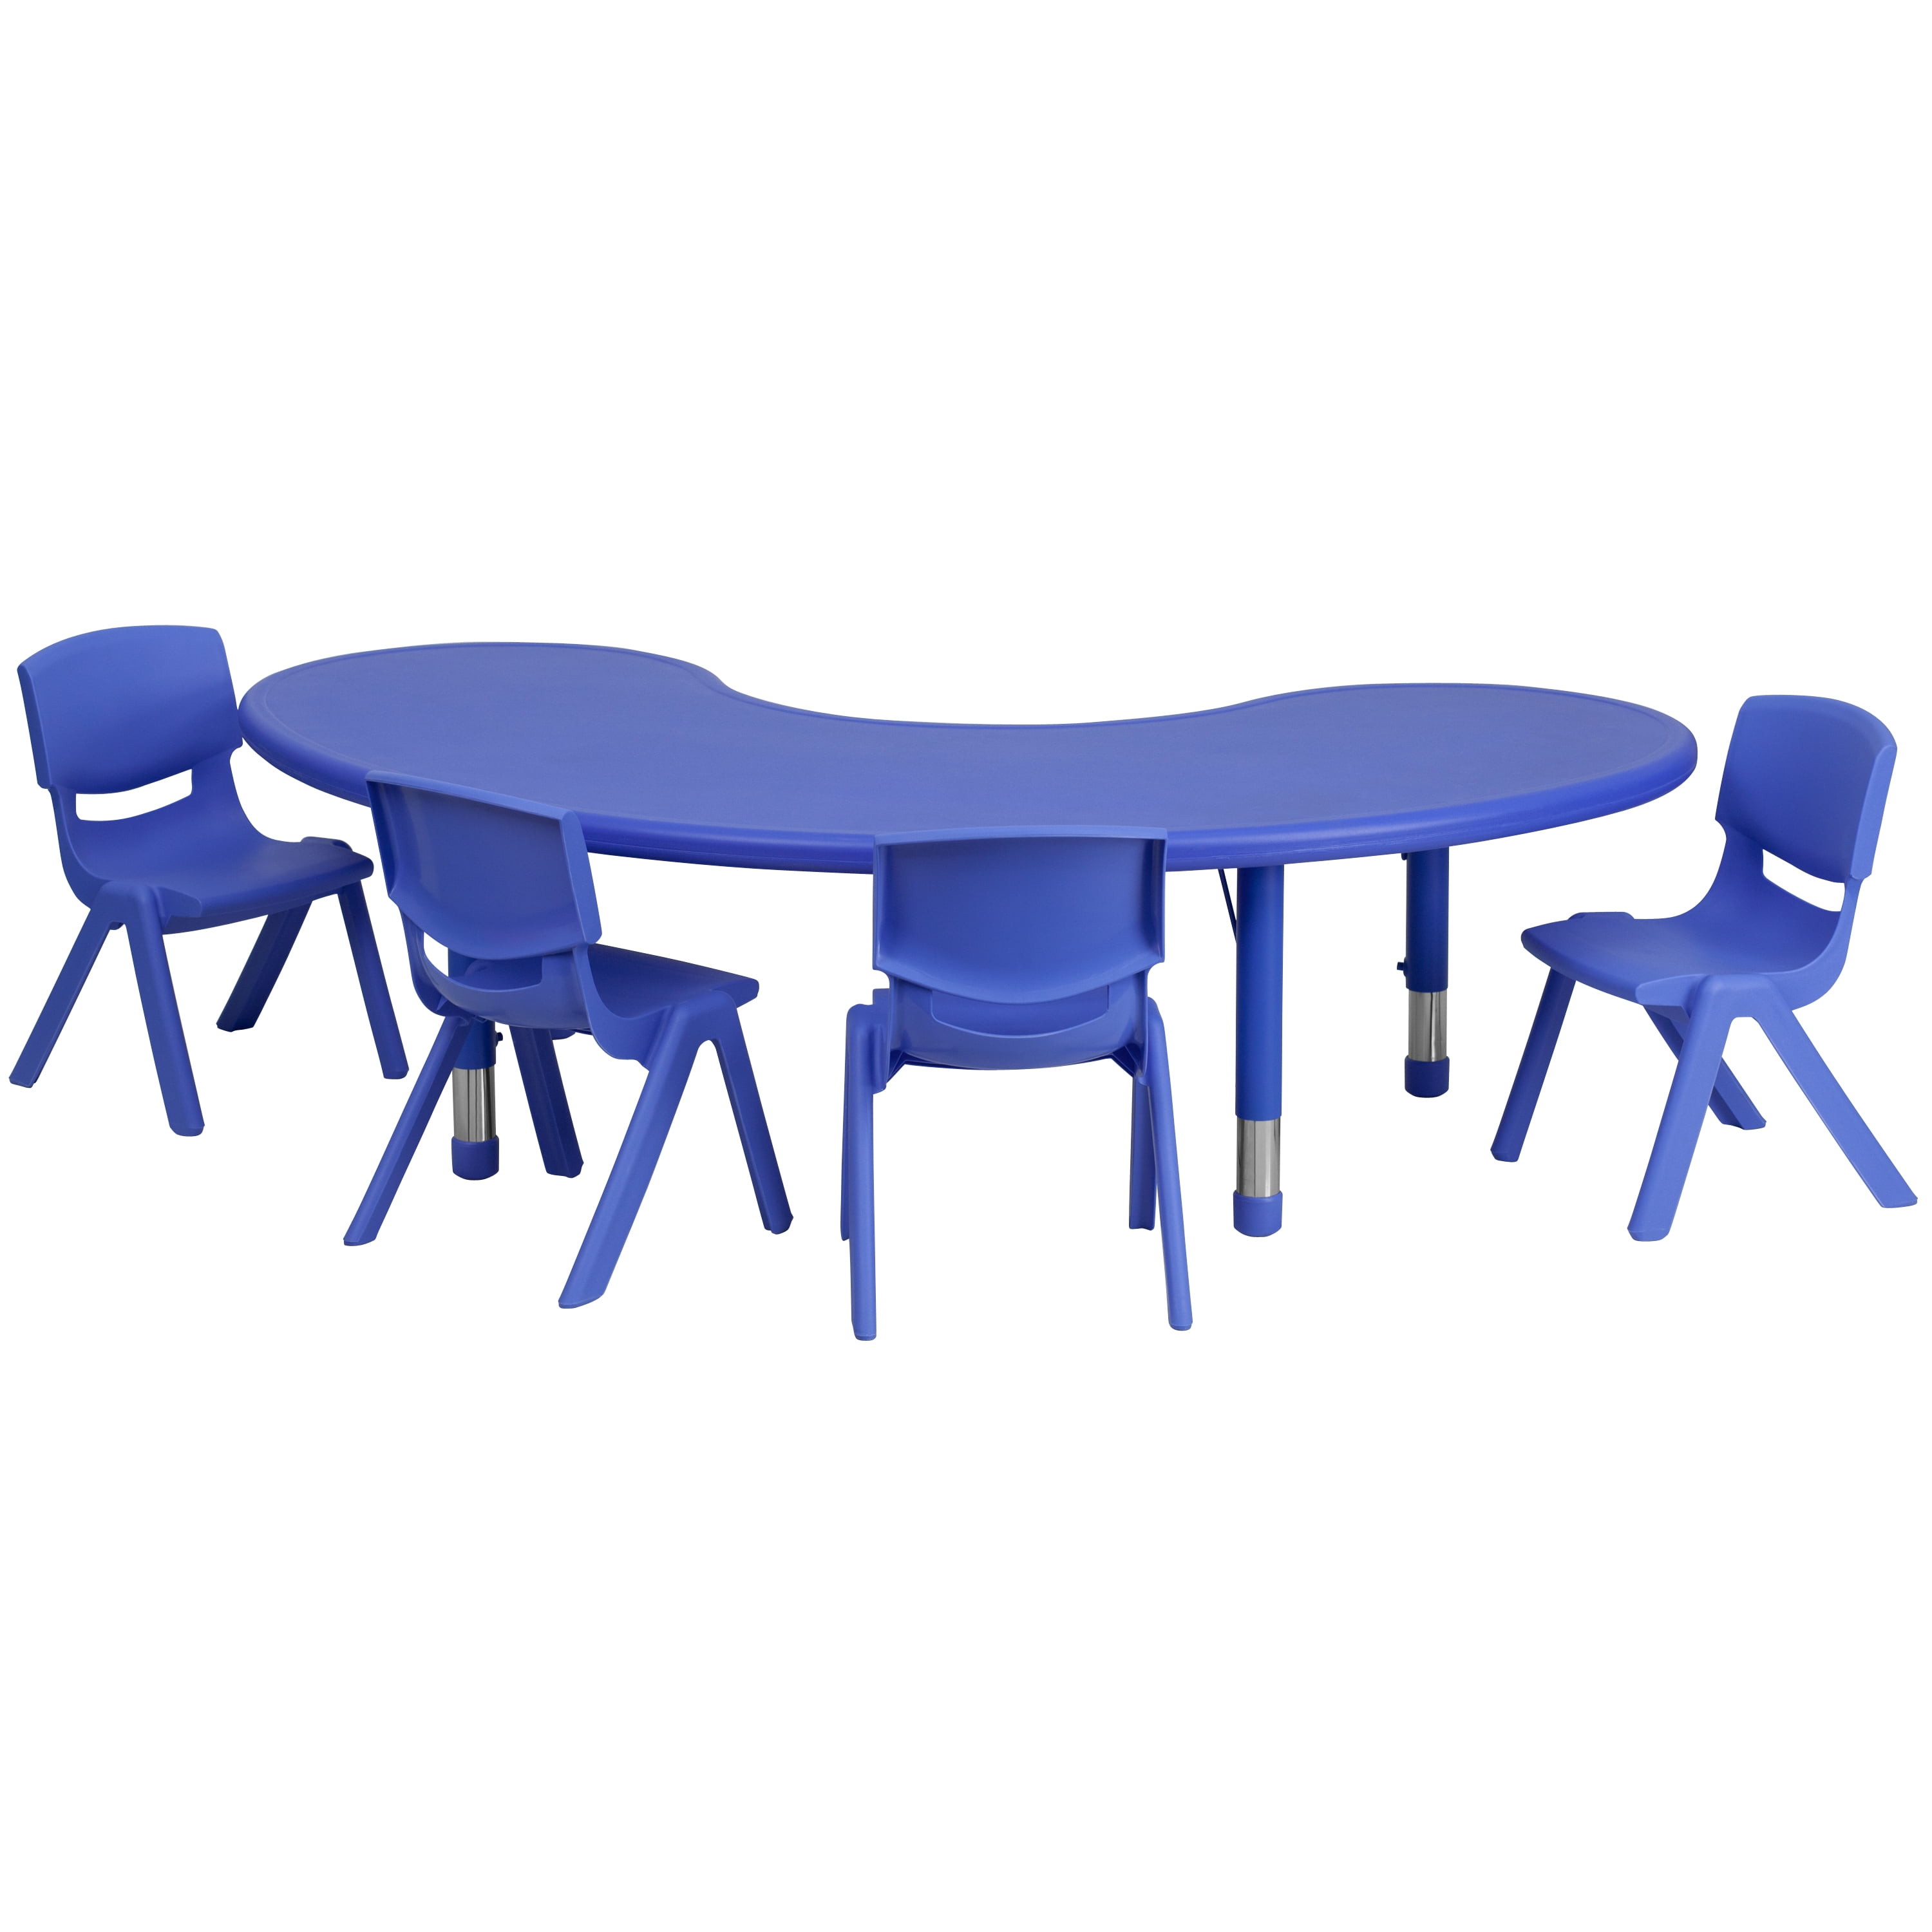 Details about   Flash Furniture Height Adjustable Half-moon Activity Table in Blue 